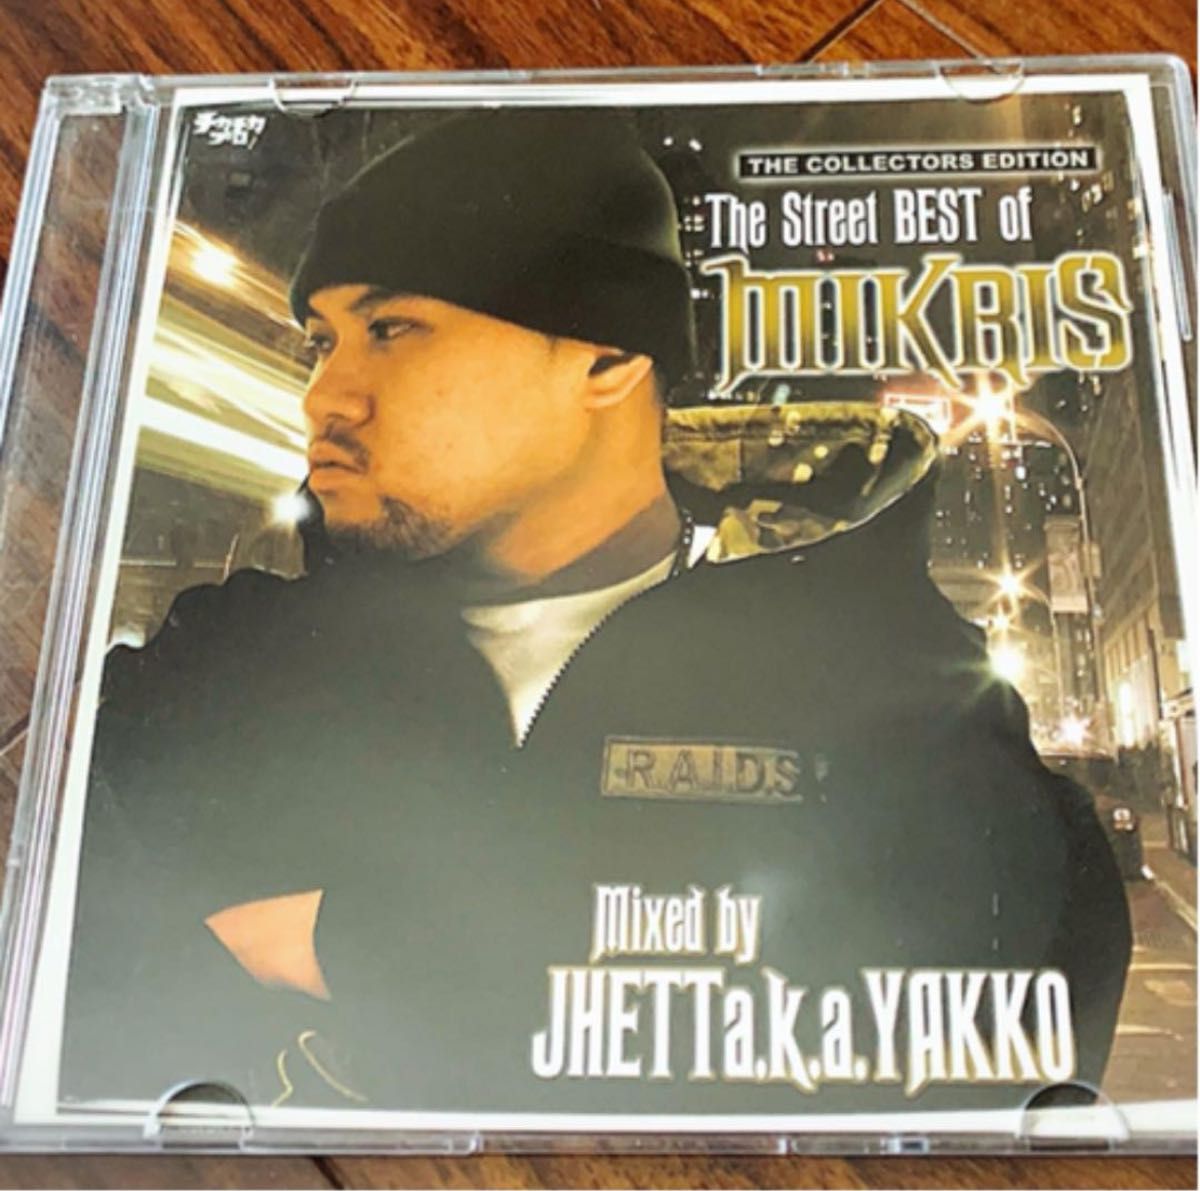 The Street BEST of MIKRIS mixed by YAKKO